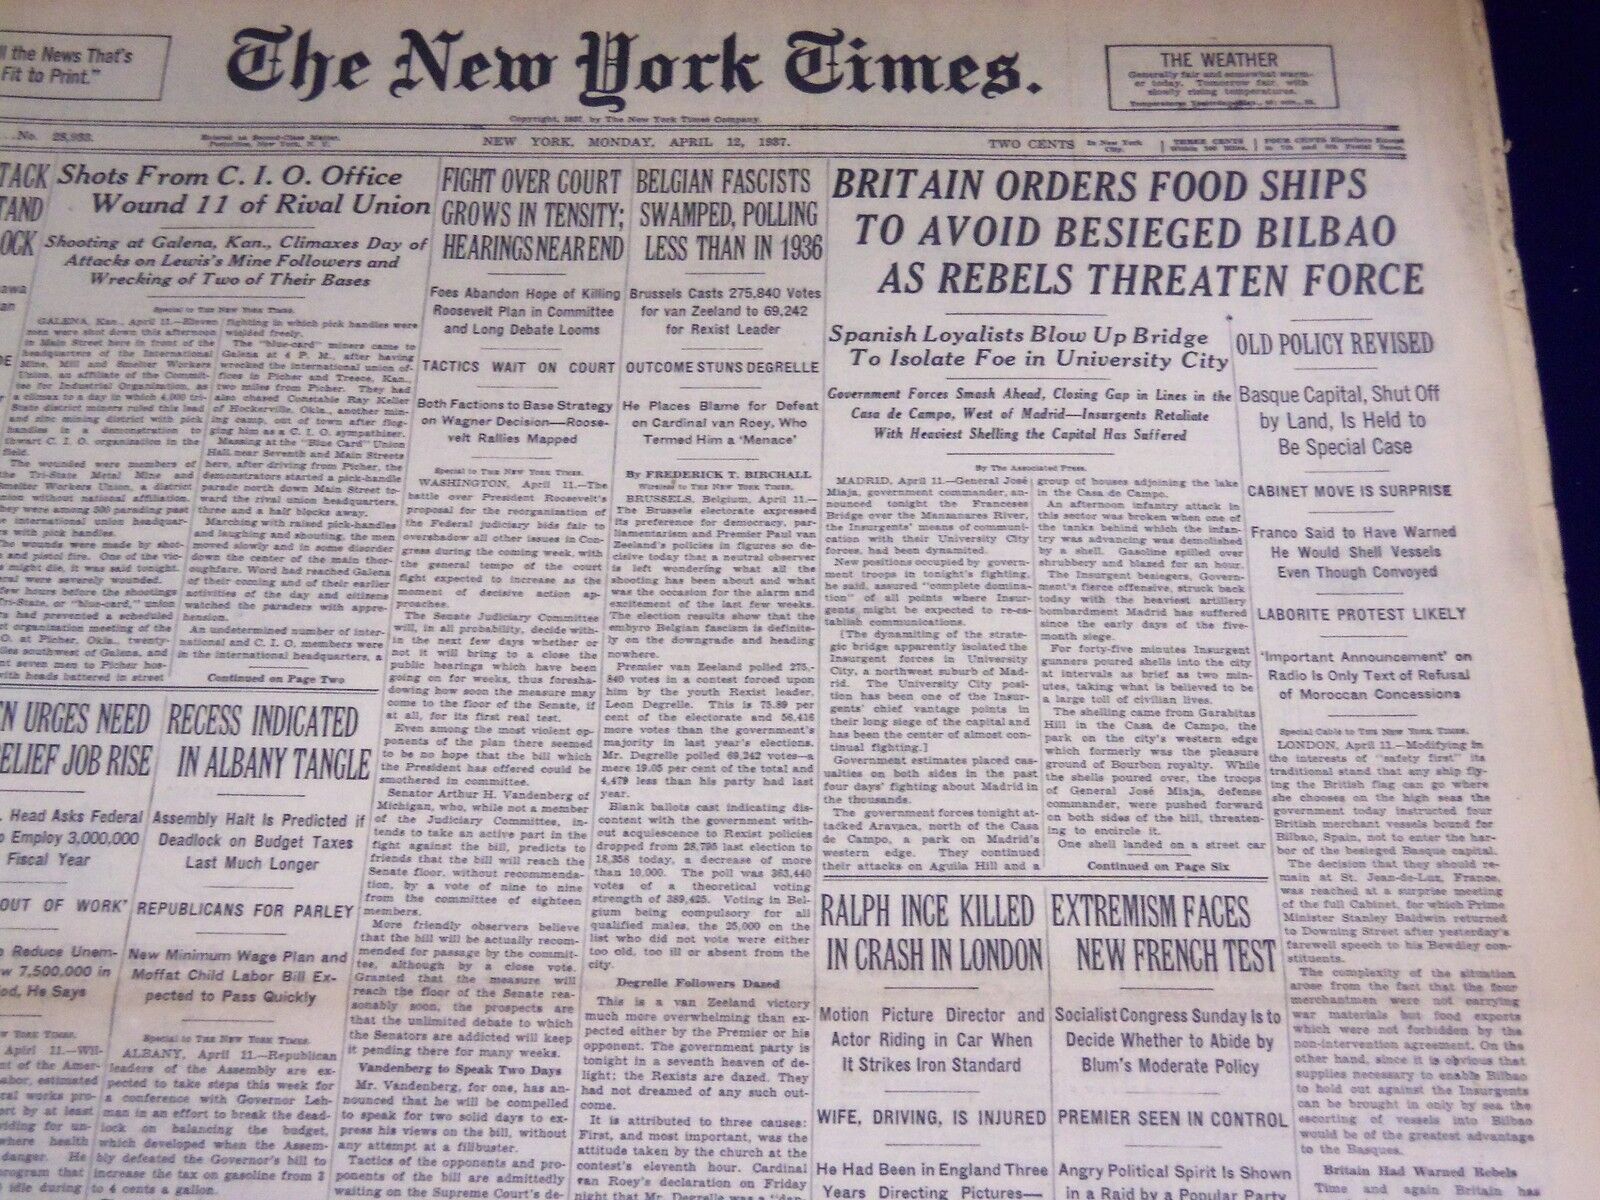 1937 APR 12 NEW YORK TIMES - BRITAIN ORDERS FOOD SHIPS TO AVOID BILBAO - NT 2782